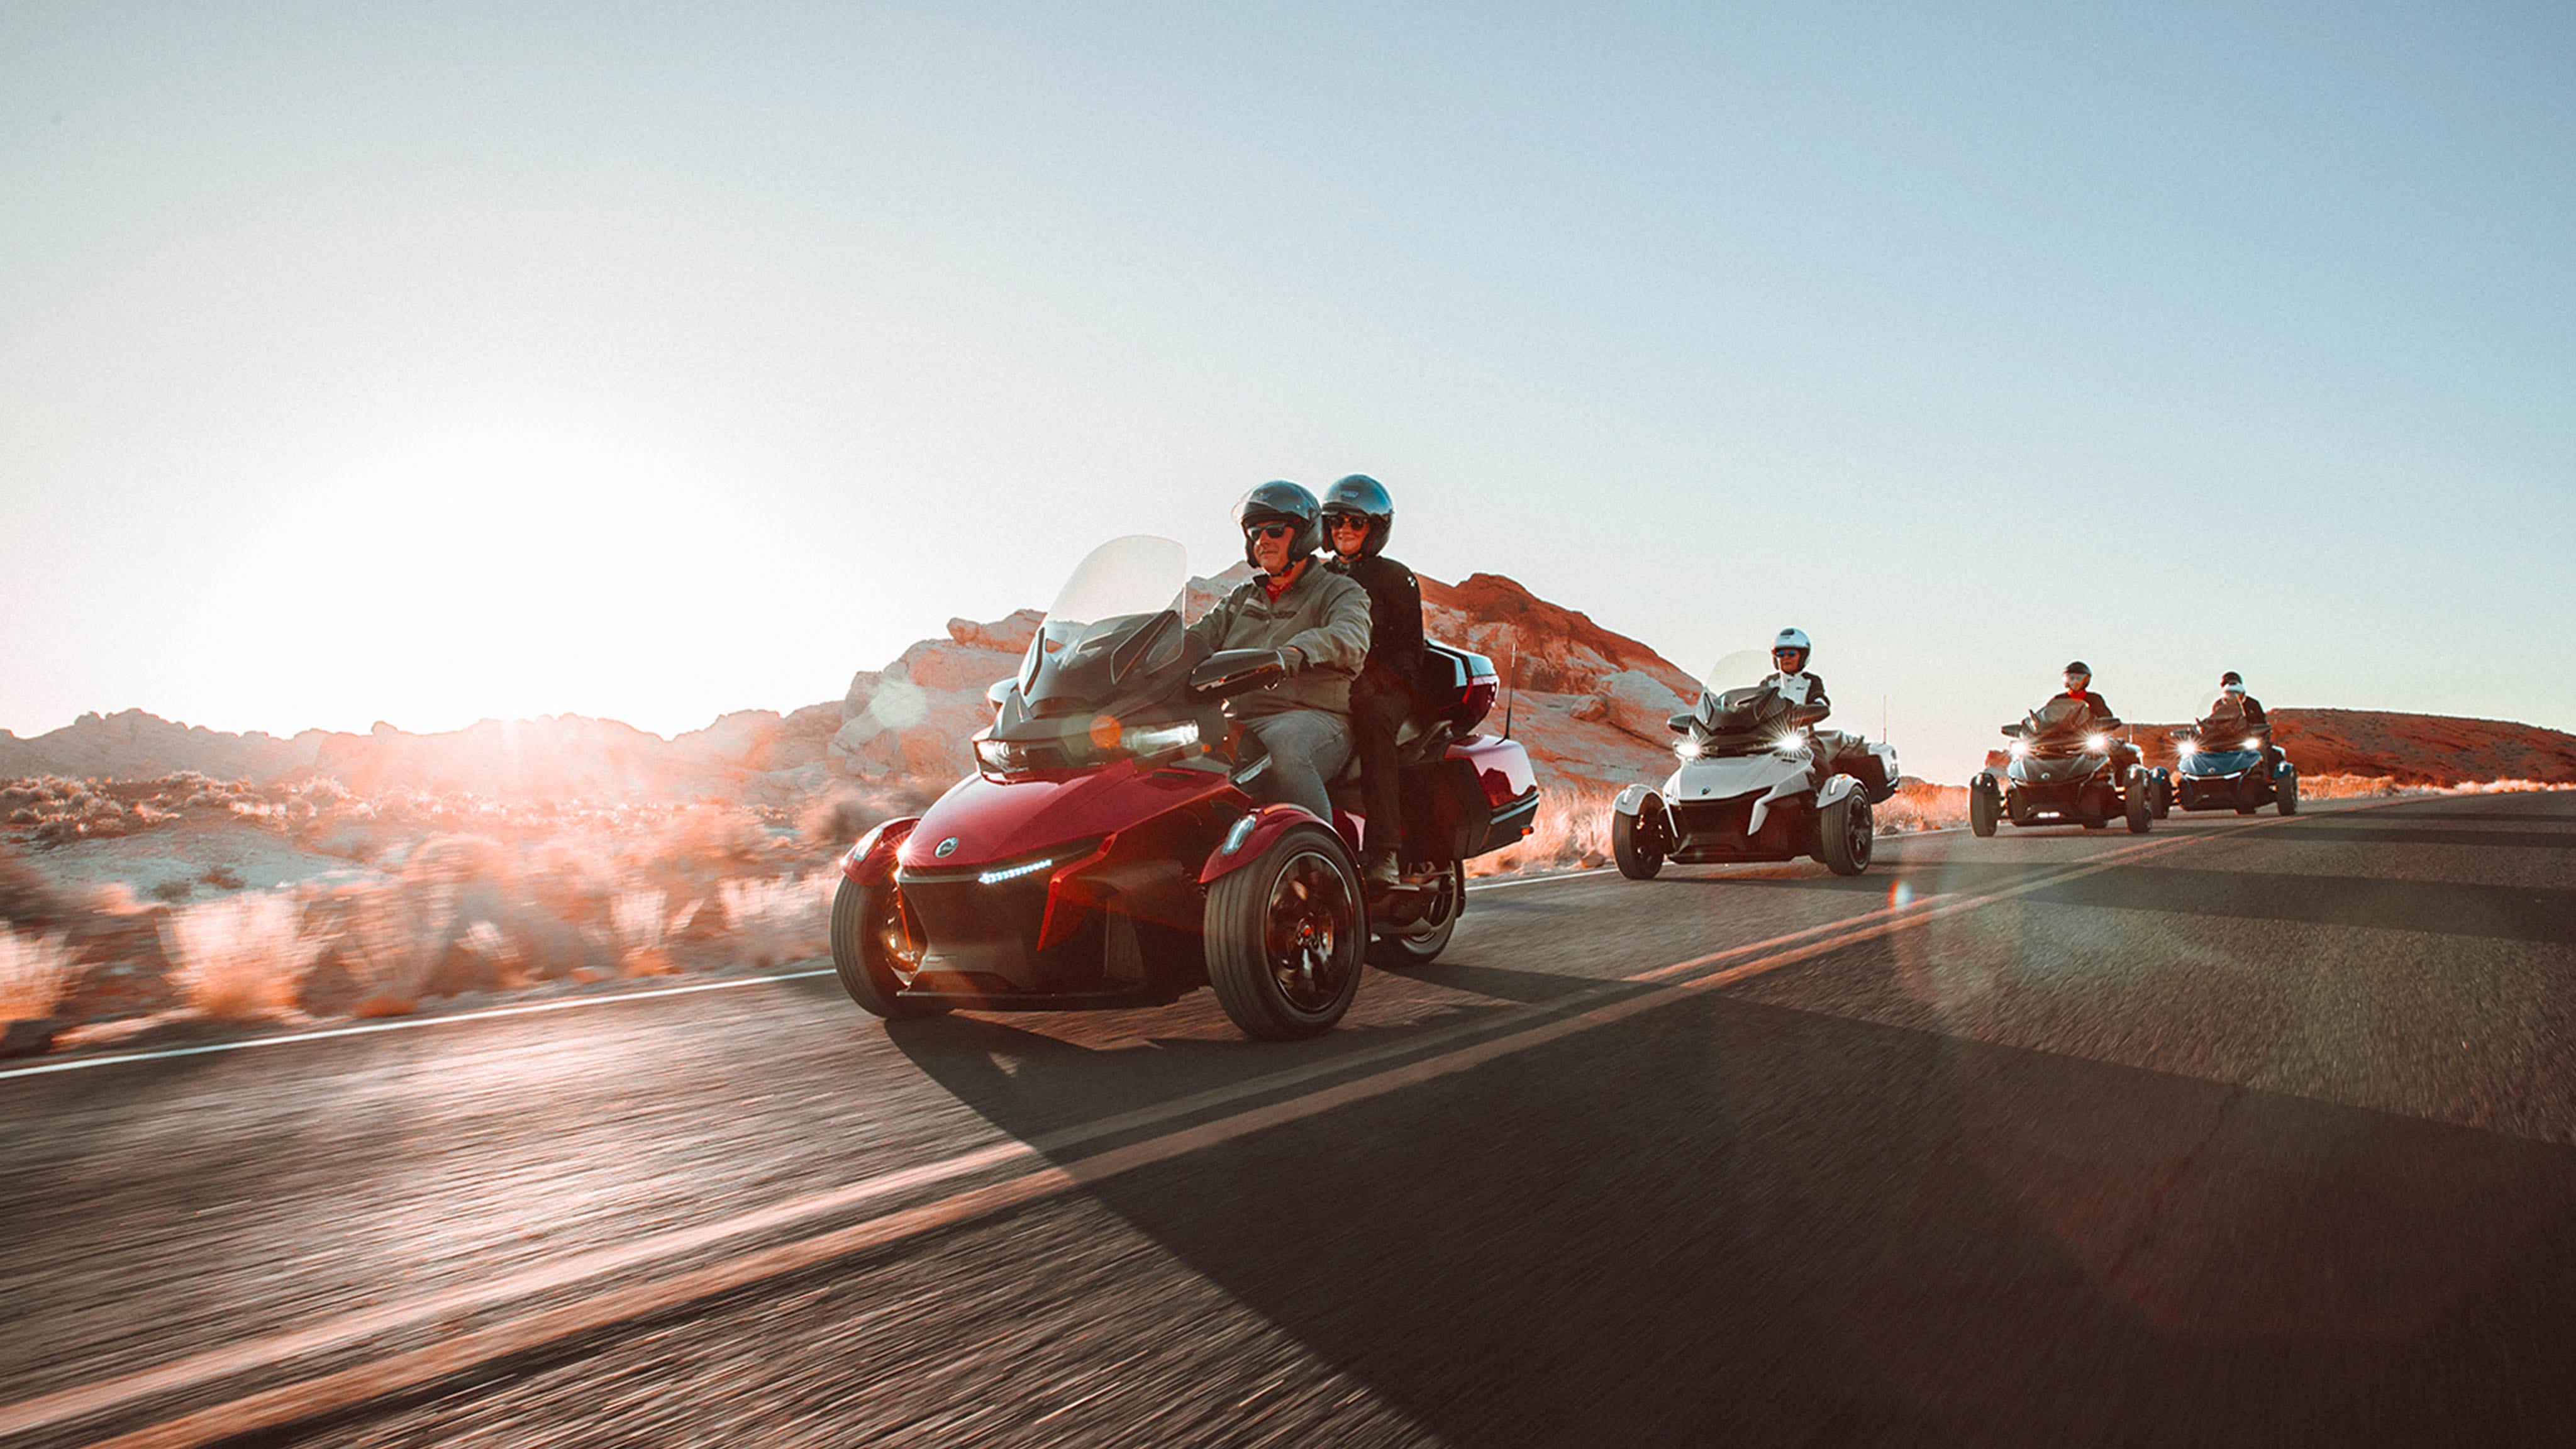 Group of people riding four Can-Am Ryker vehicles on a scenic road